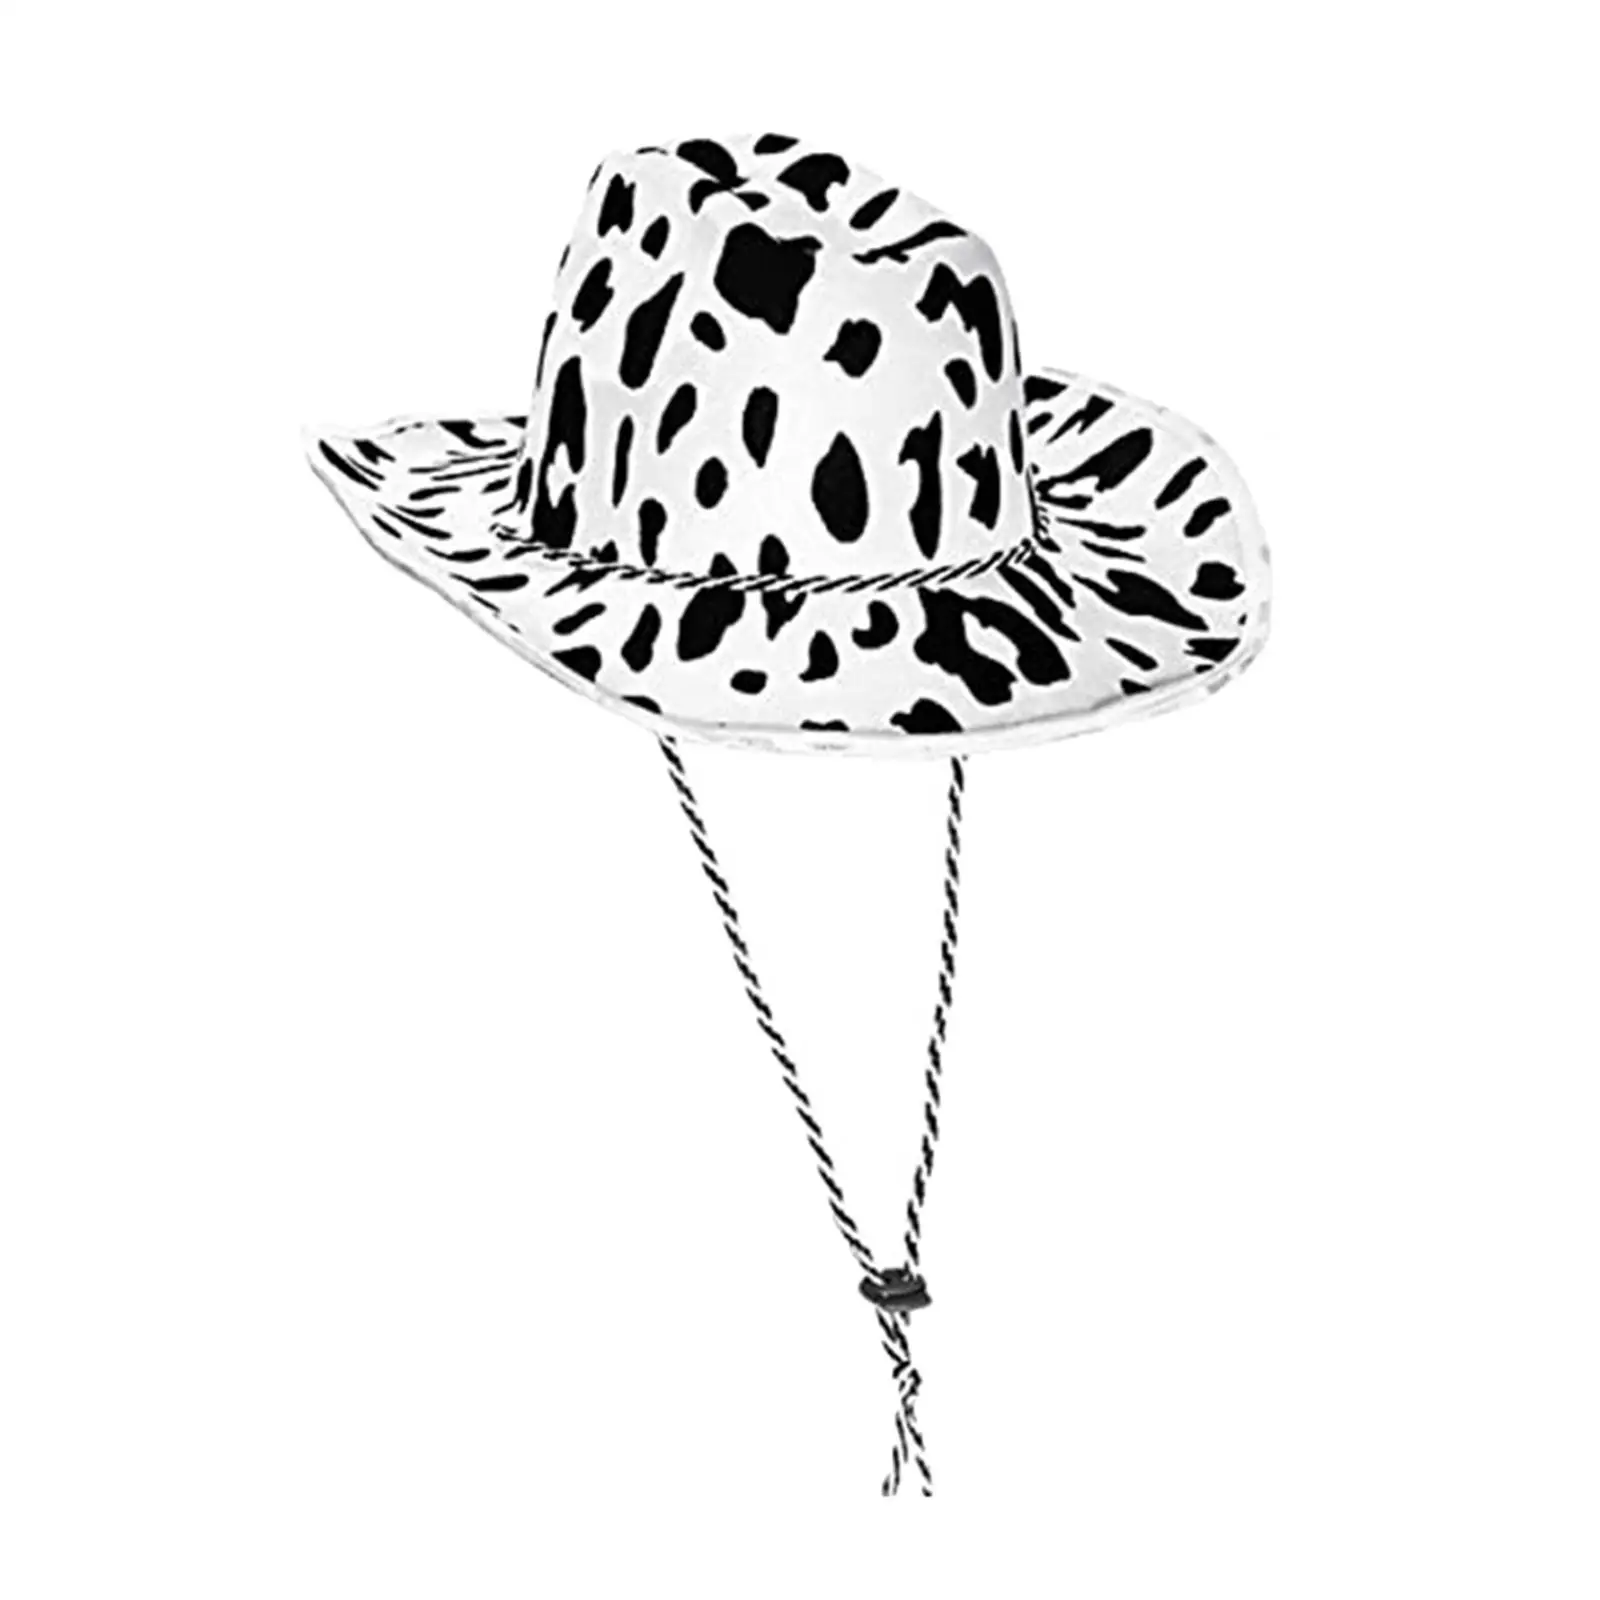 Western Cow Pattern Hat with Wind Lanyard Fancy Dress up Costume Clothes Wide Brim Cowboy Cowgirl Hat for Holiday Performance